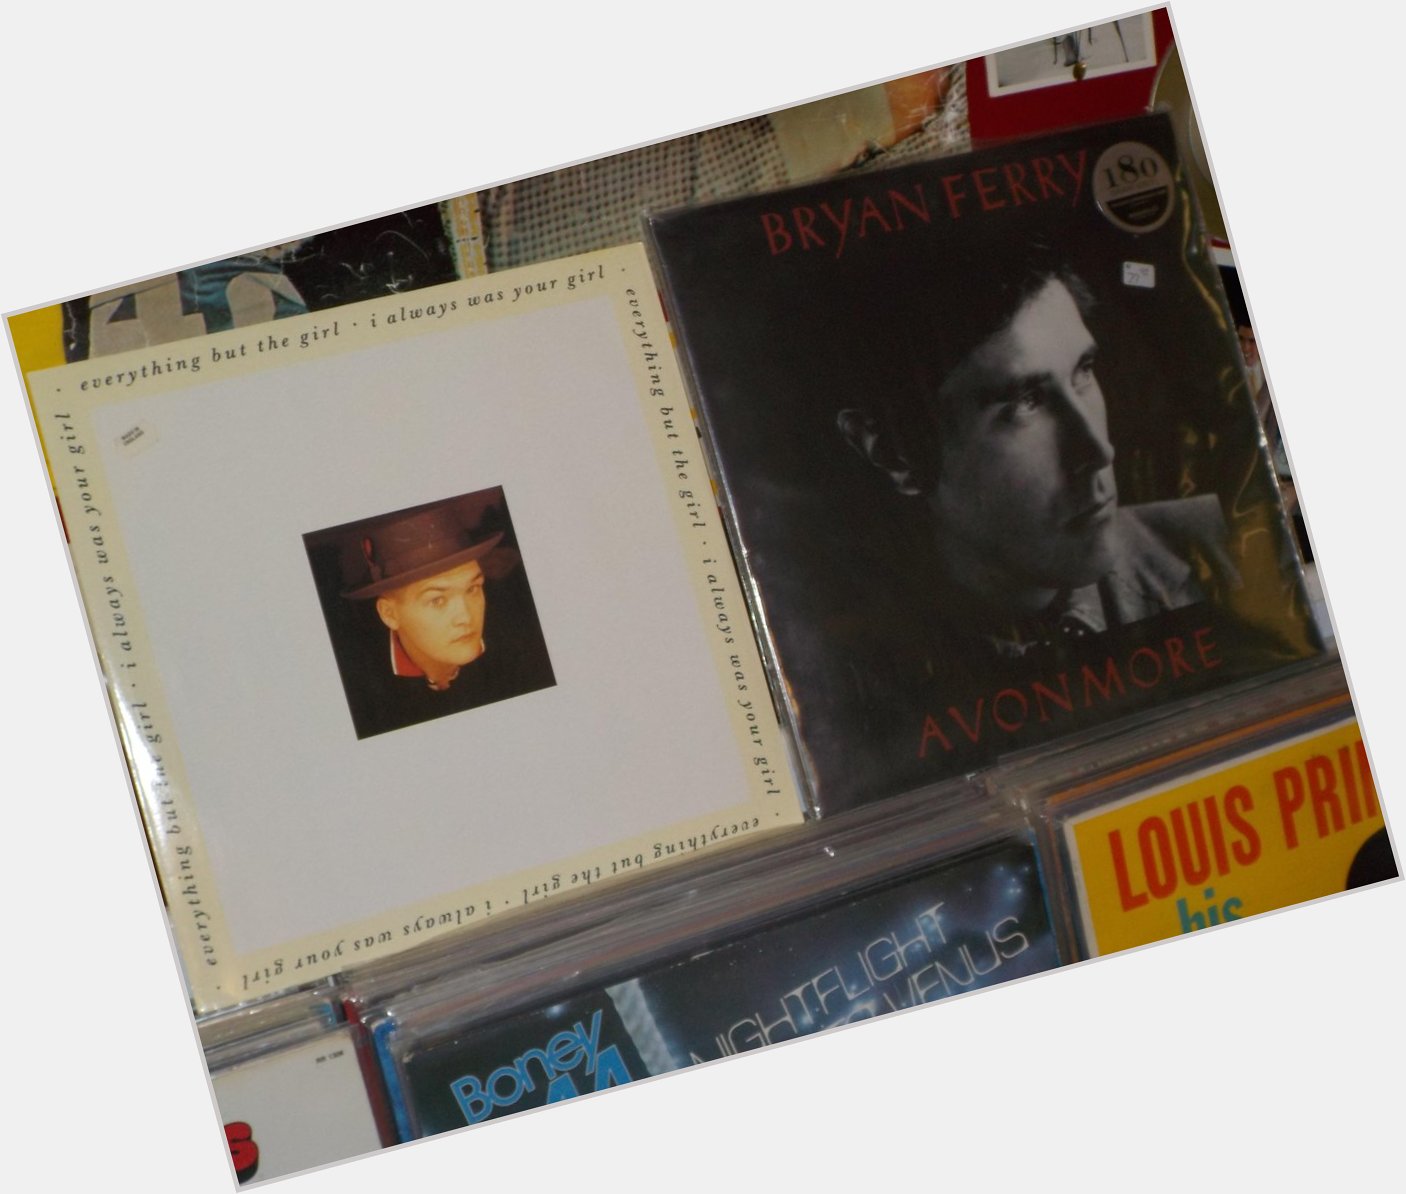 Happy Birthday to Tracey Thorn of Everything But The Girl and Bryan Ferry (Roxy Music) 